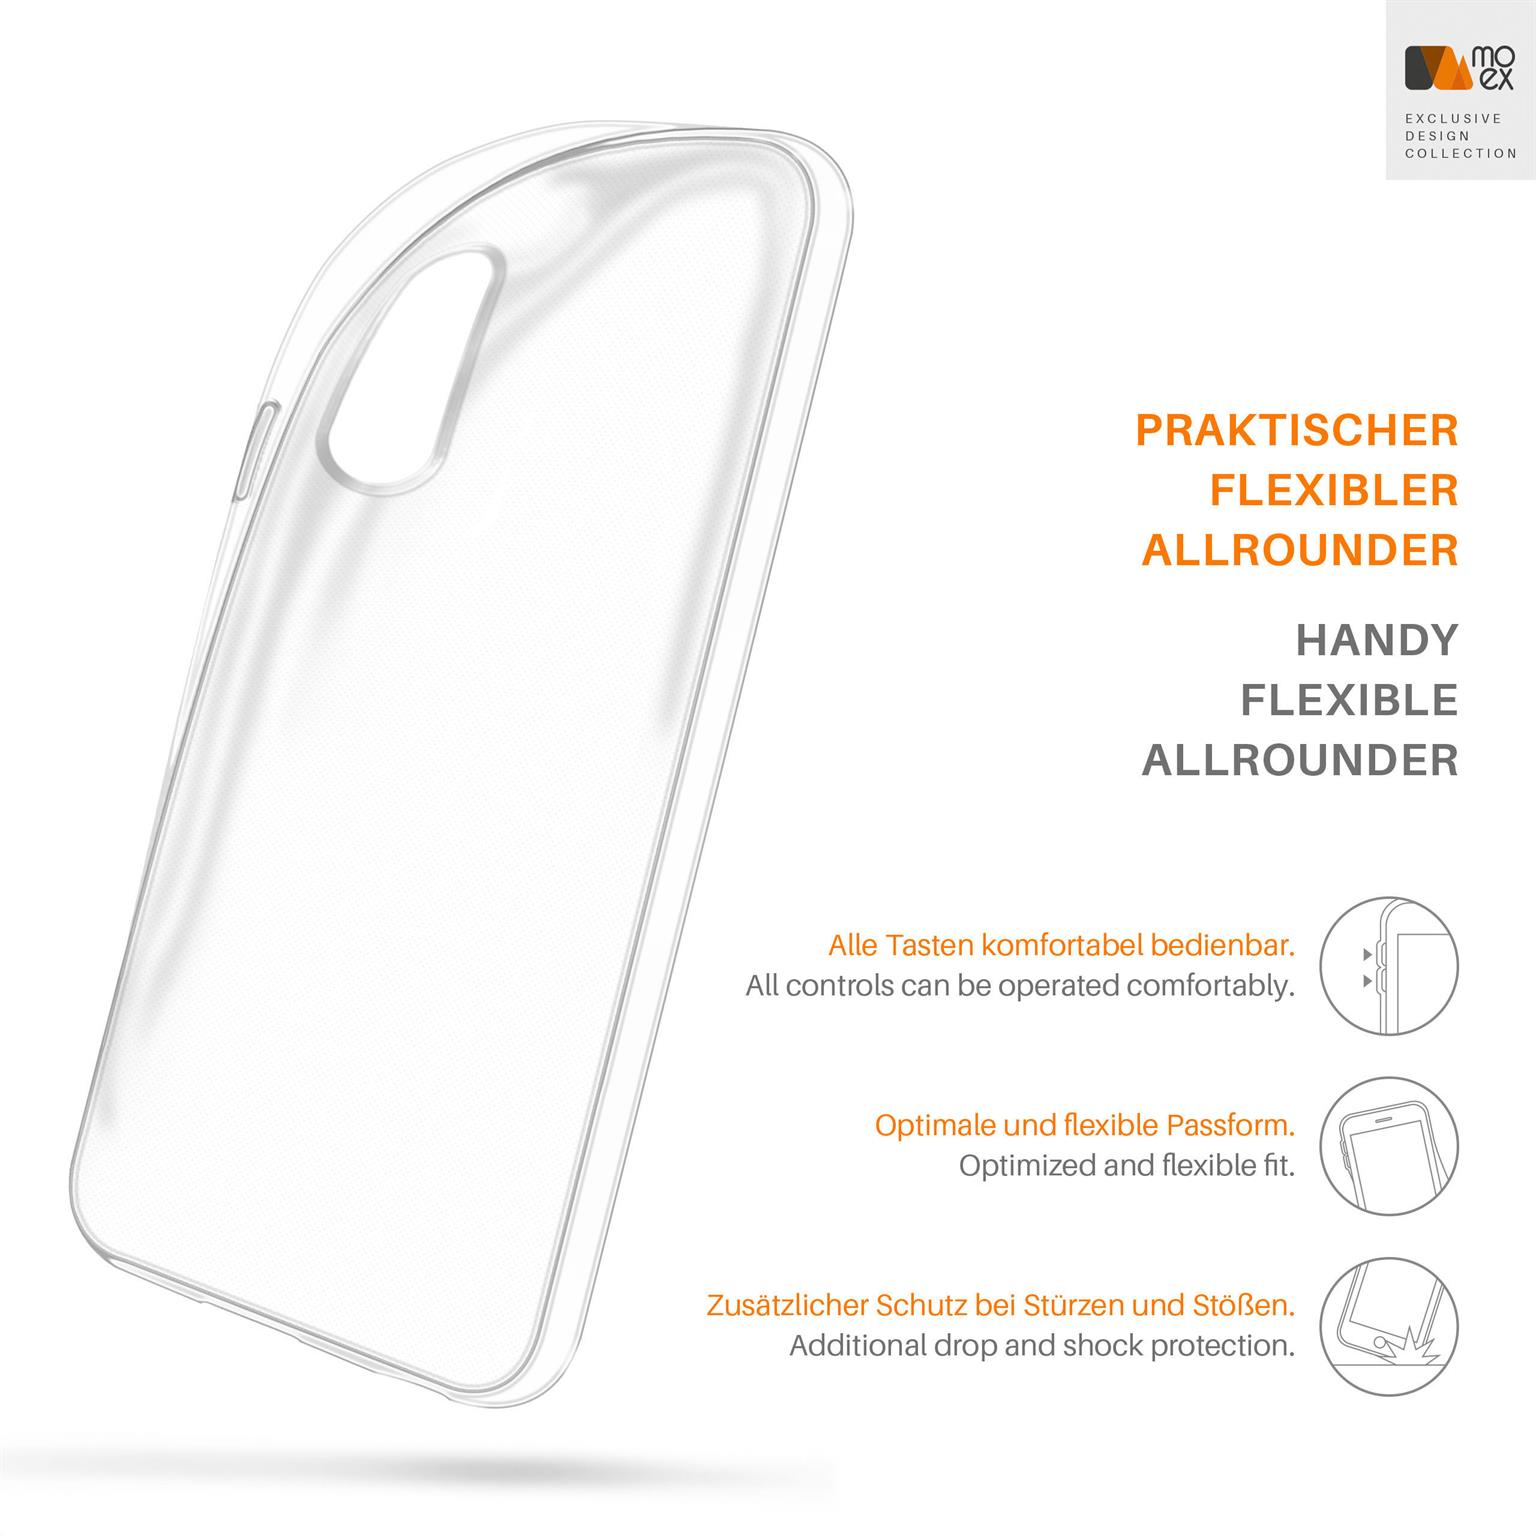 Aero MOEX Backcover, 9AT, Case, Xiaomi, Crystal-Clear Redmi